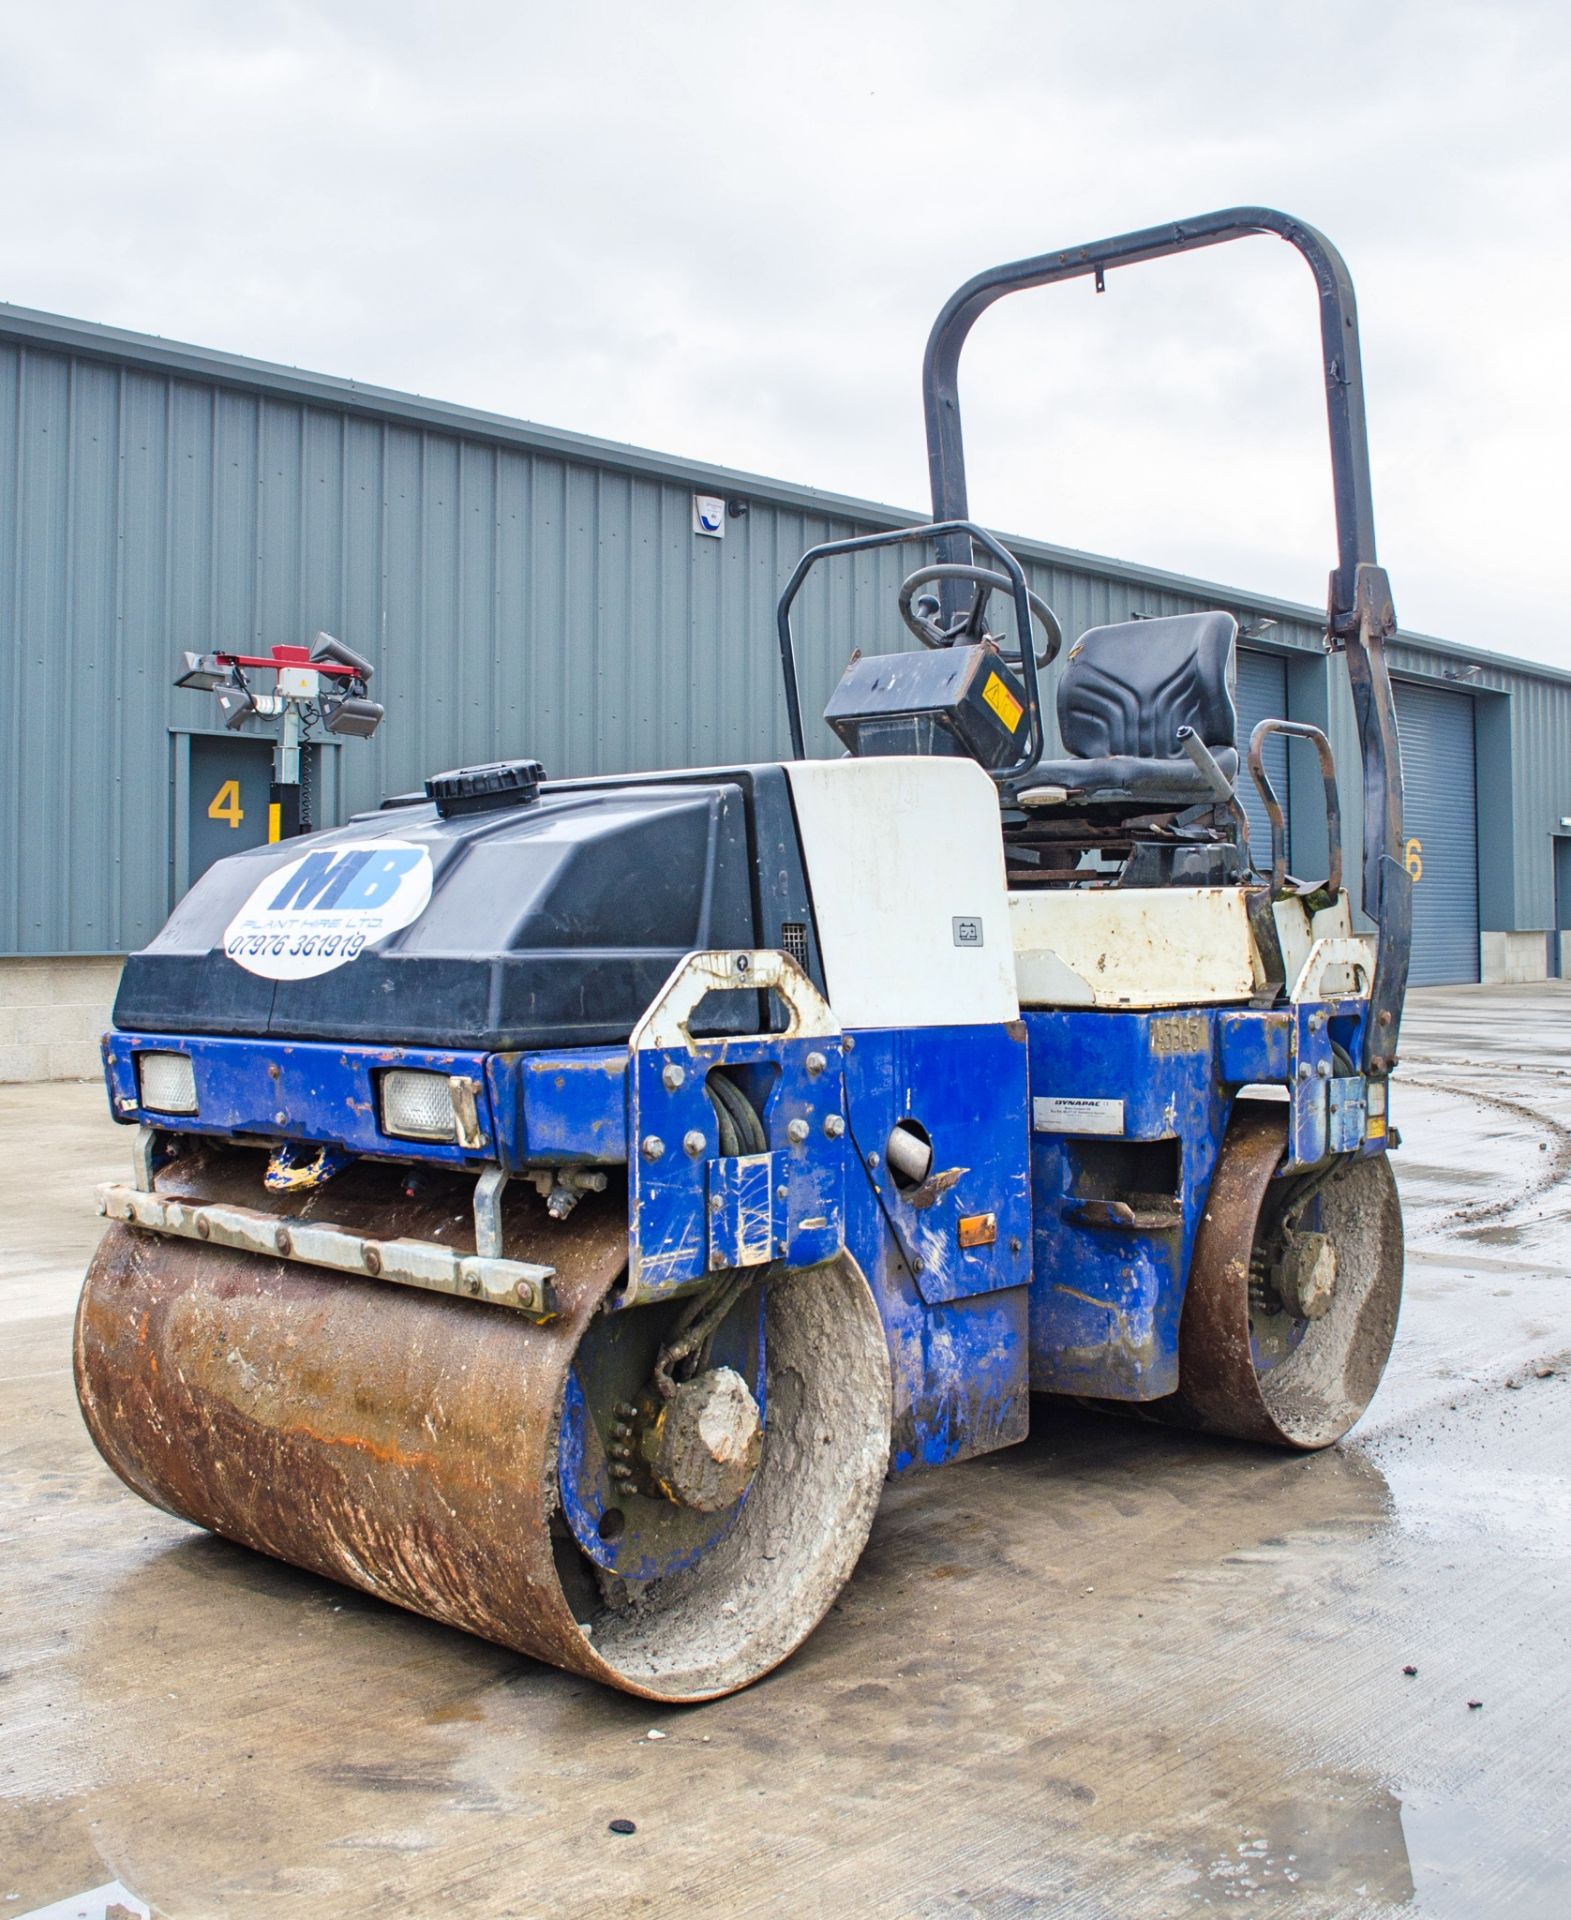 Dynapac CC122 diesel driven double drum roller Year: 2002 S/N: 60116757